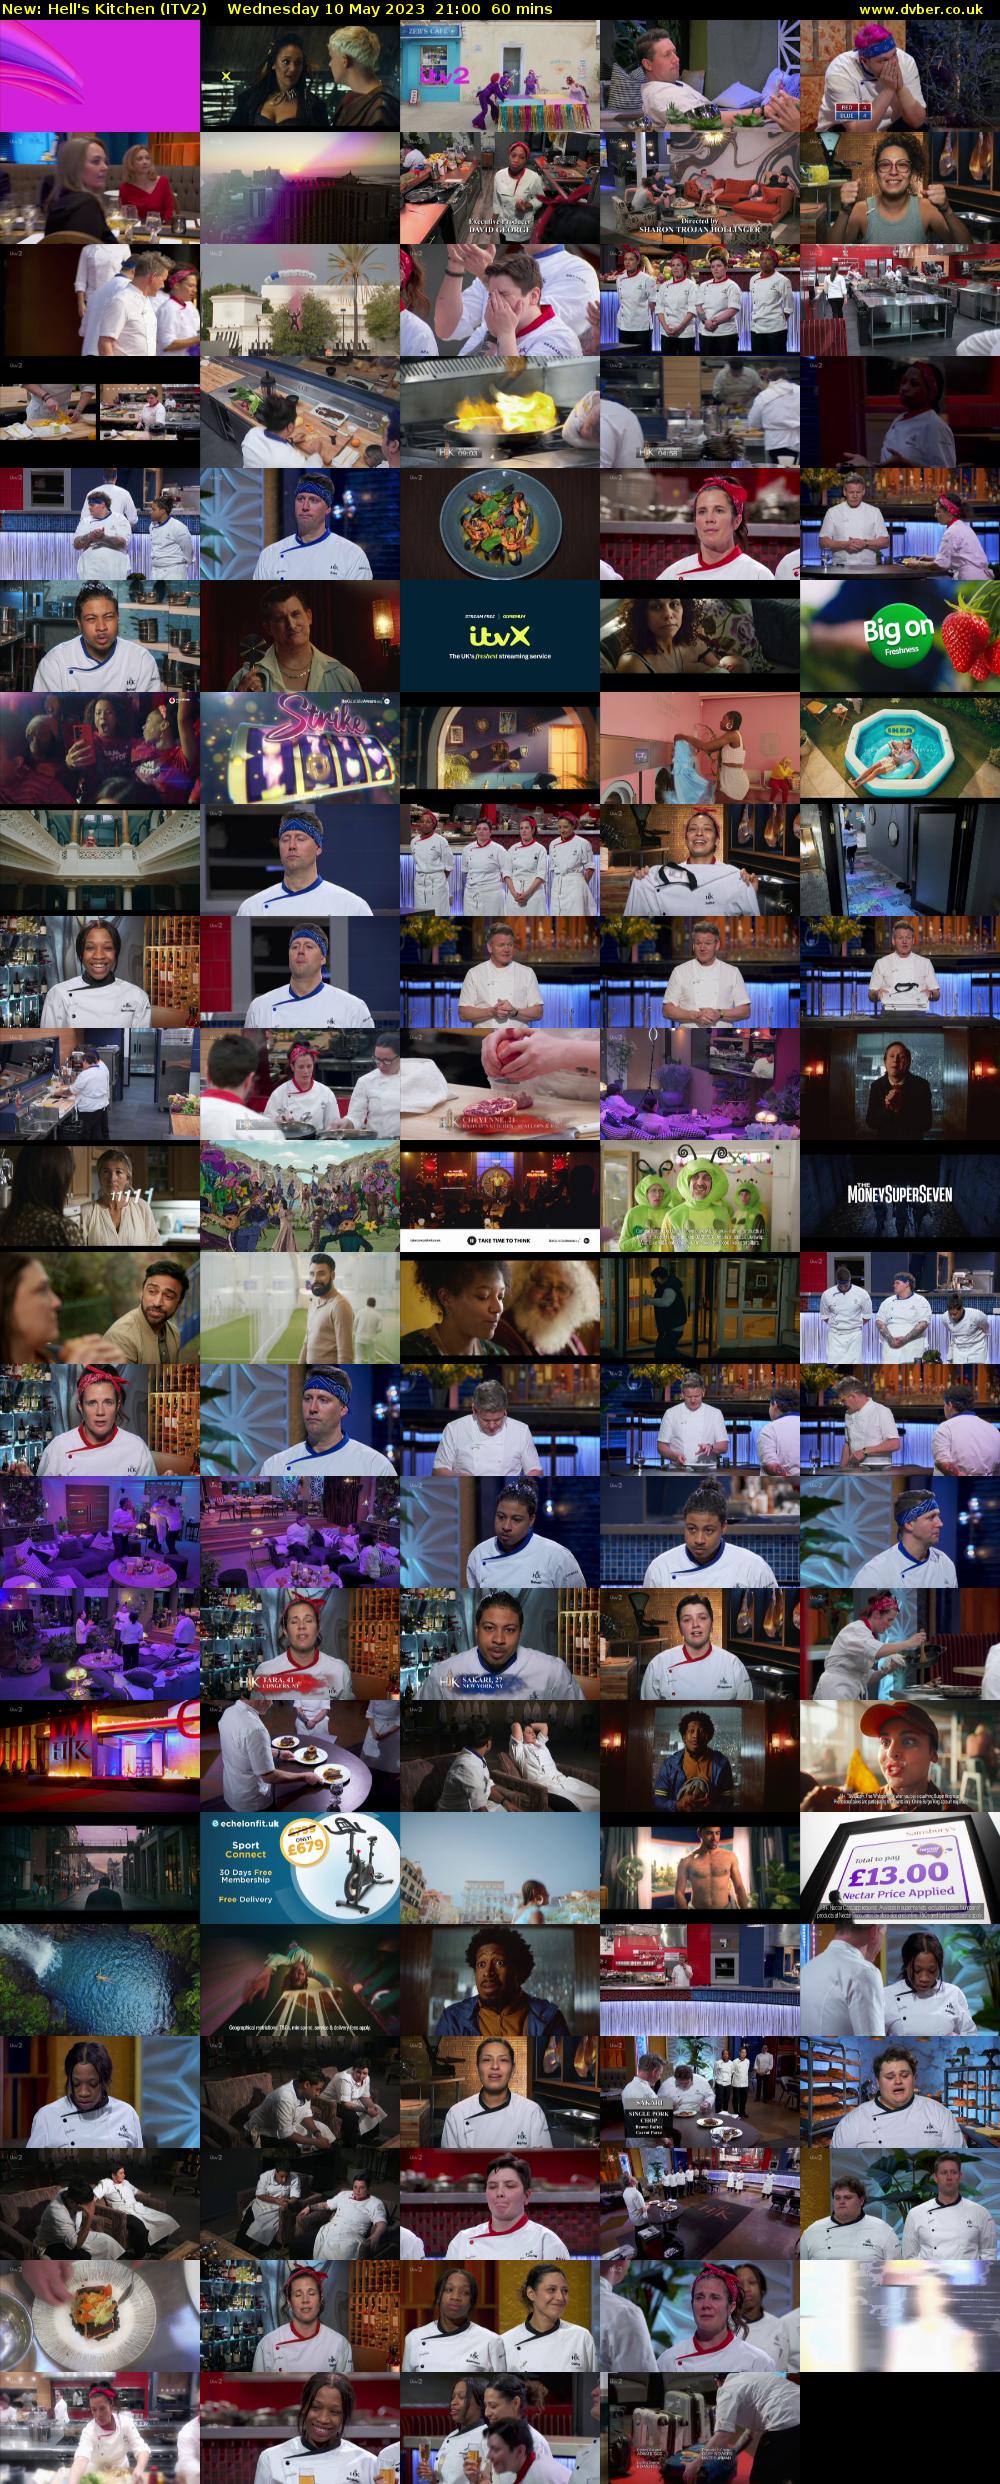 Hell's Kitchen (ITV2) Wednesday 10 May 2023 21:00 - 22:00